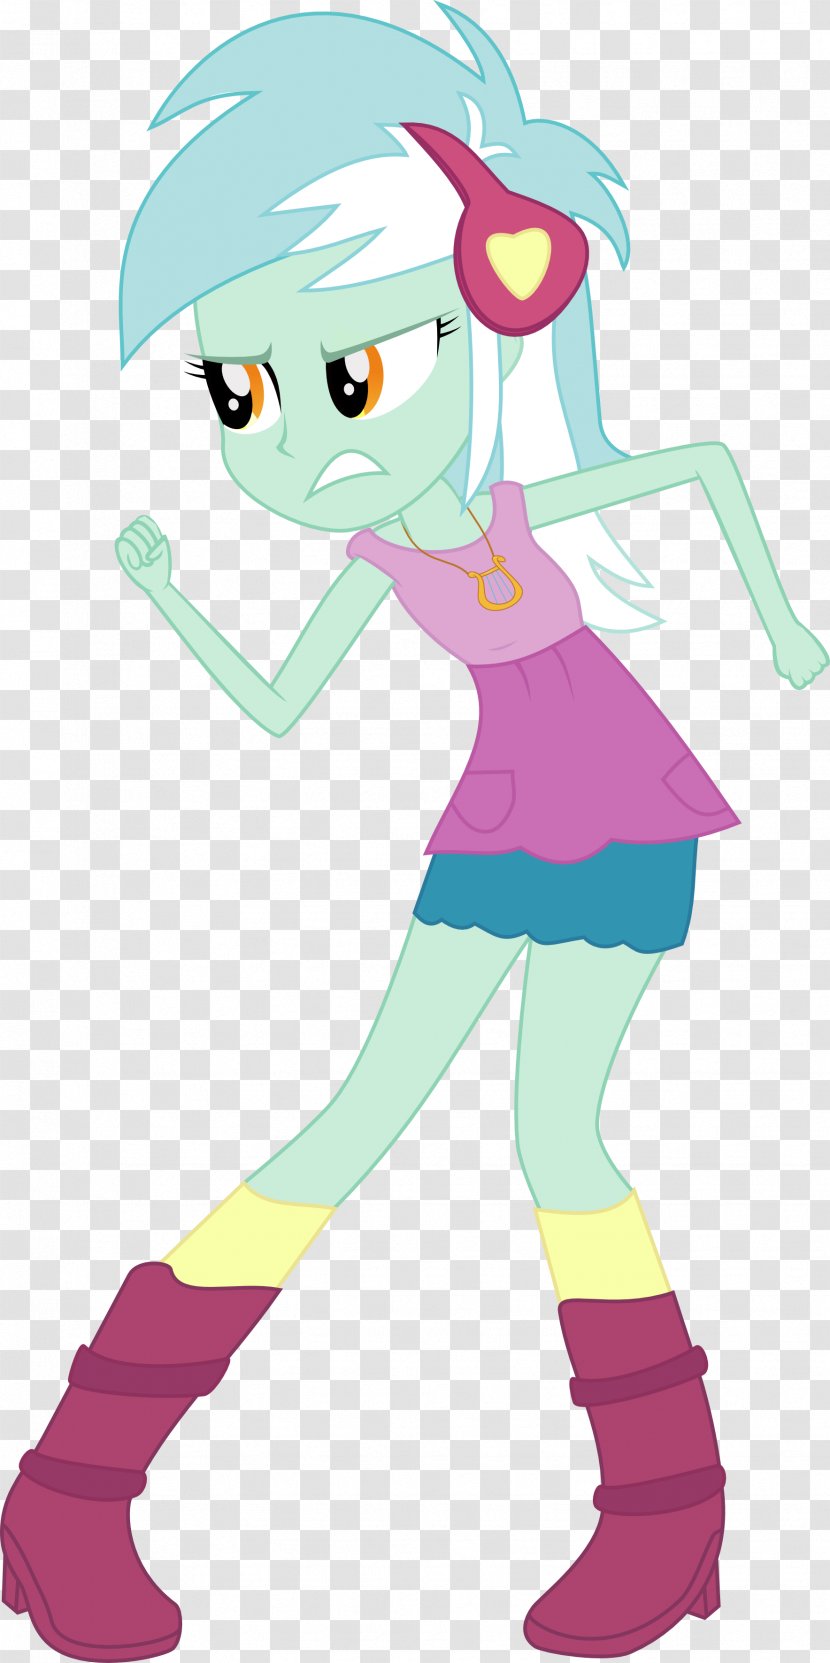 My Little Pony: Equestria Girls Derpy Hooves - Cartoon - Pony Transparent PNG